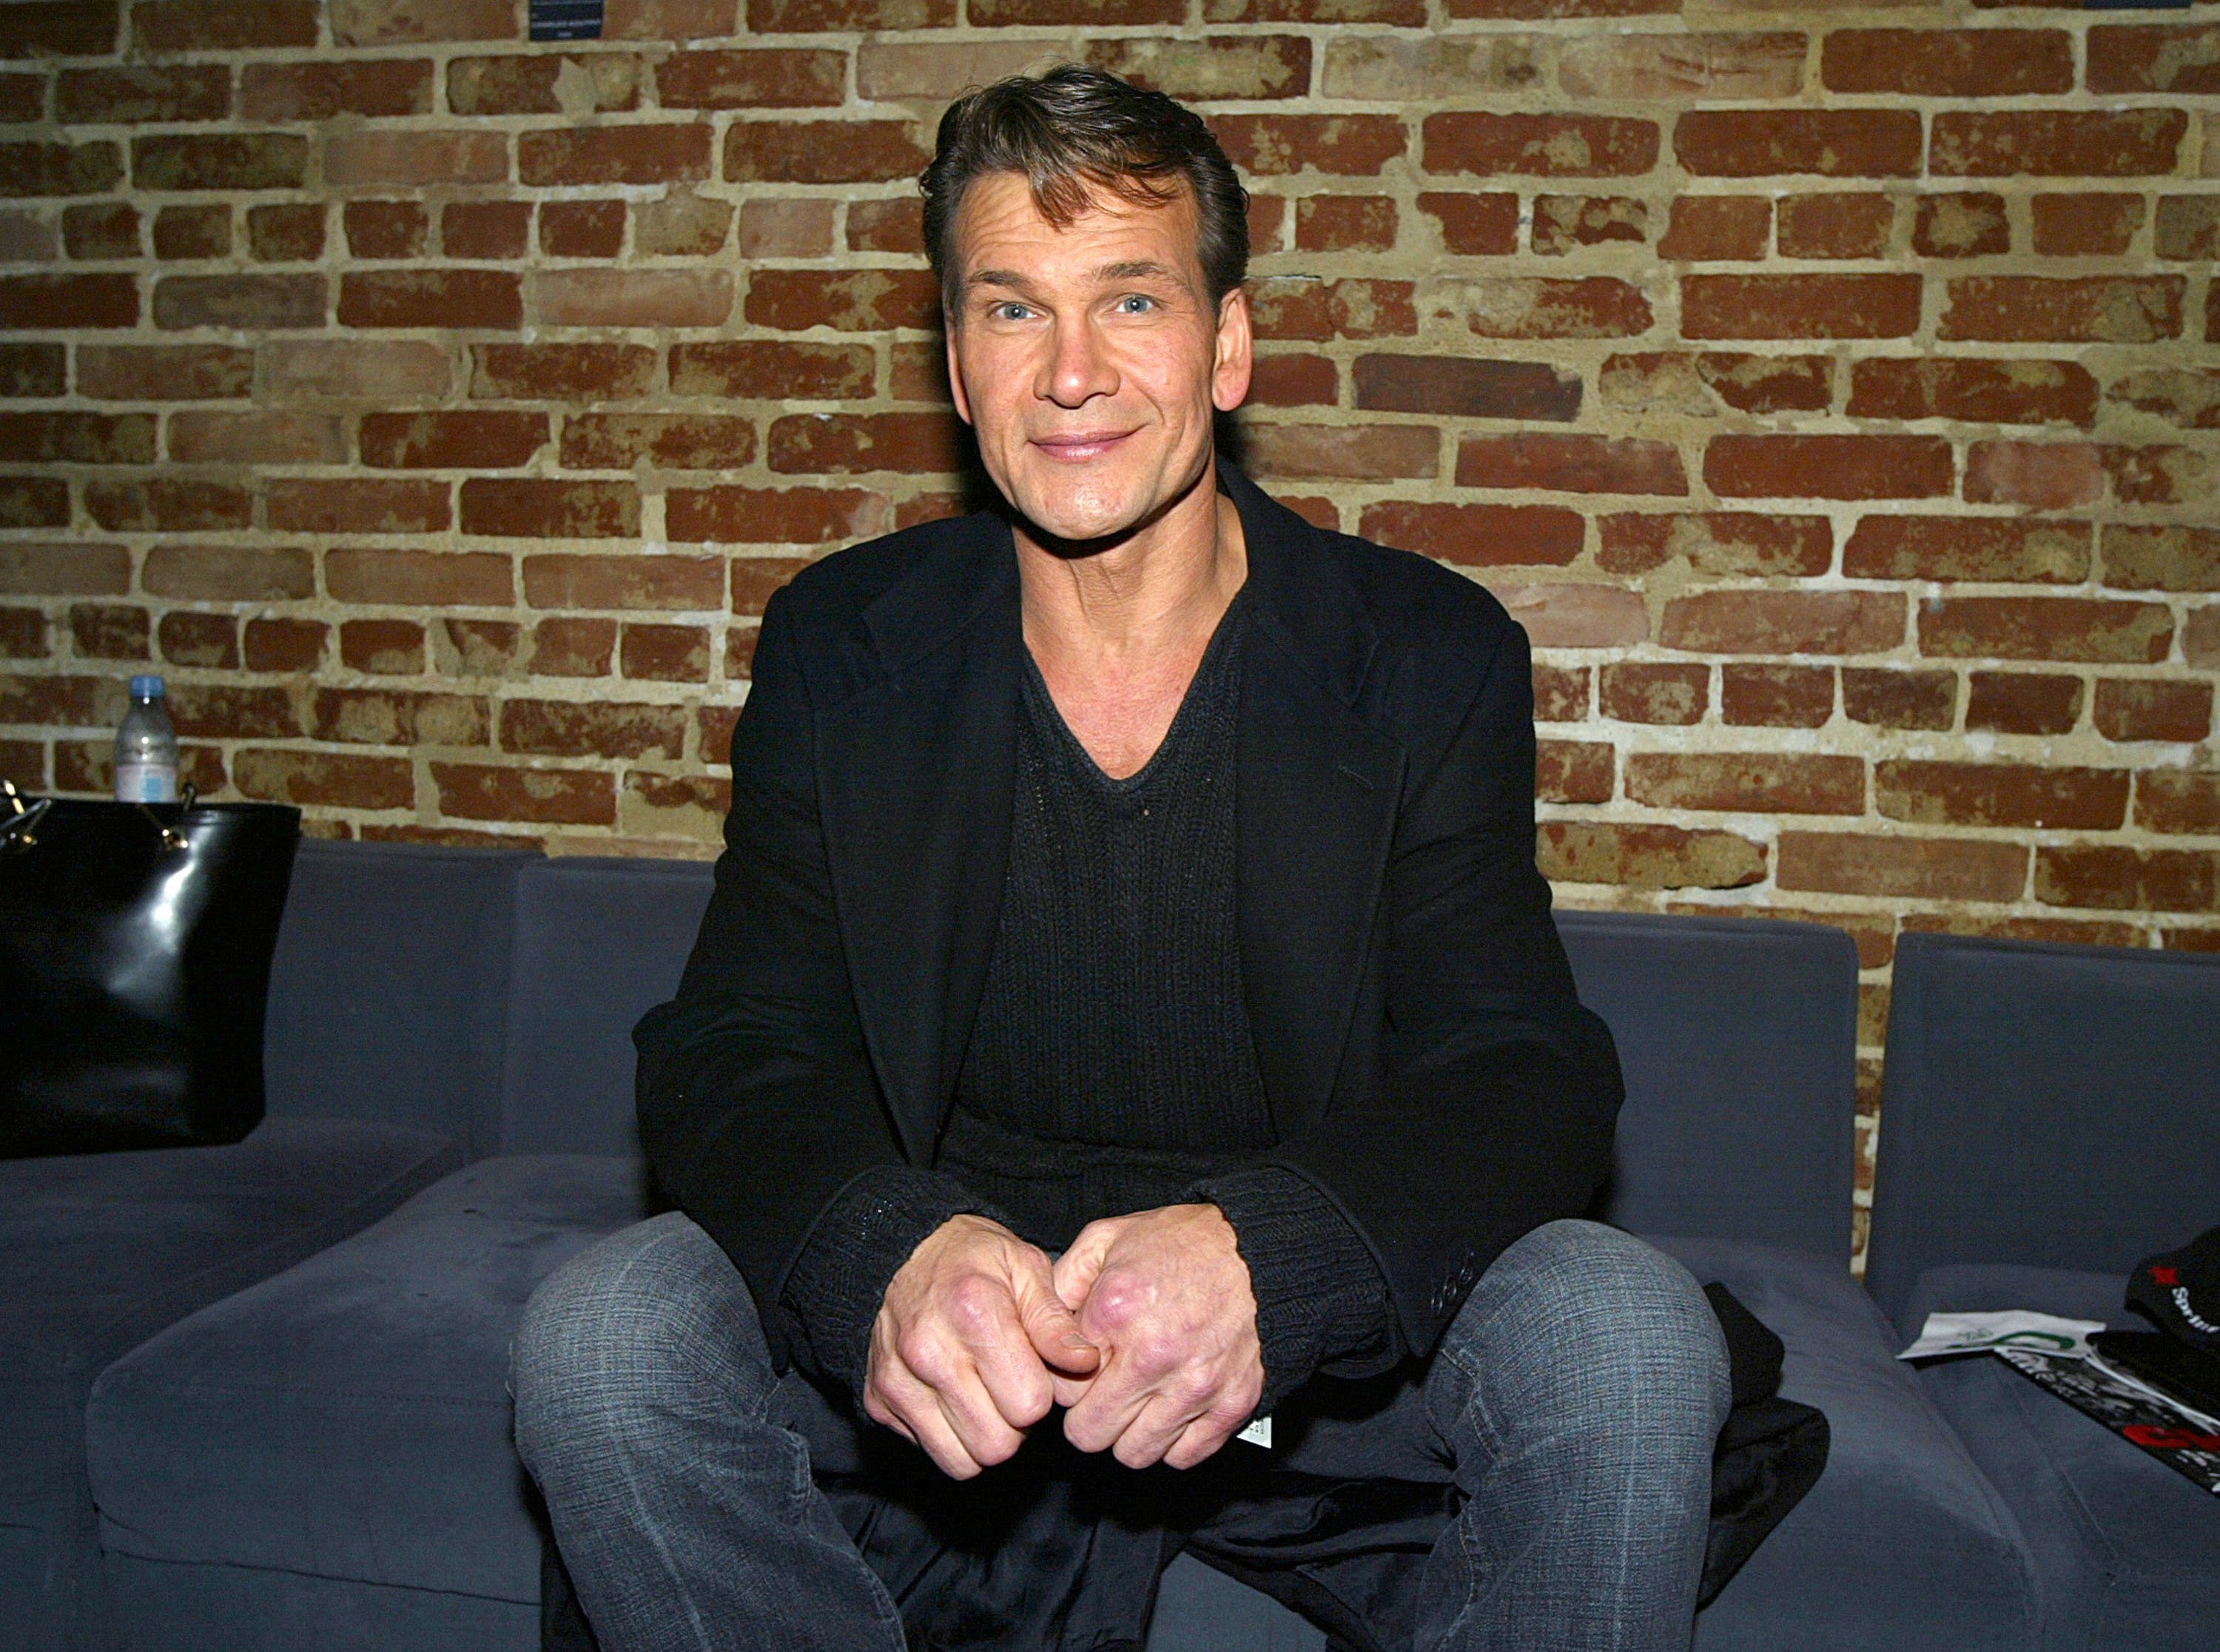 Patrick Swayze attends the after-party for "Chicago - The Musical" on January 8, 2004 at Cinespace, in Los Angeles, California